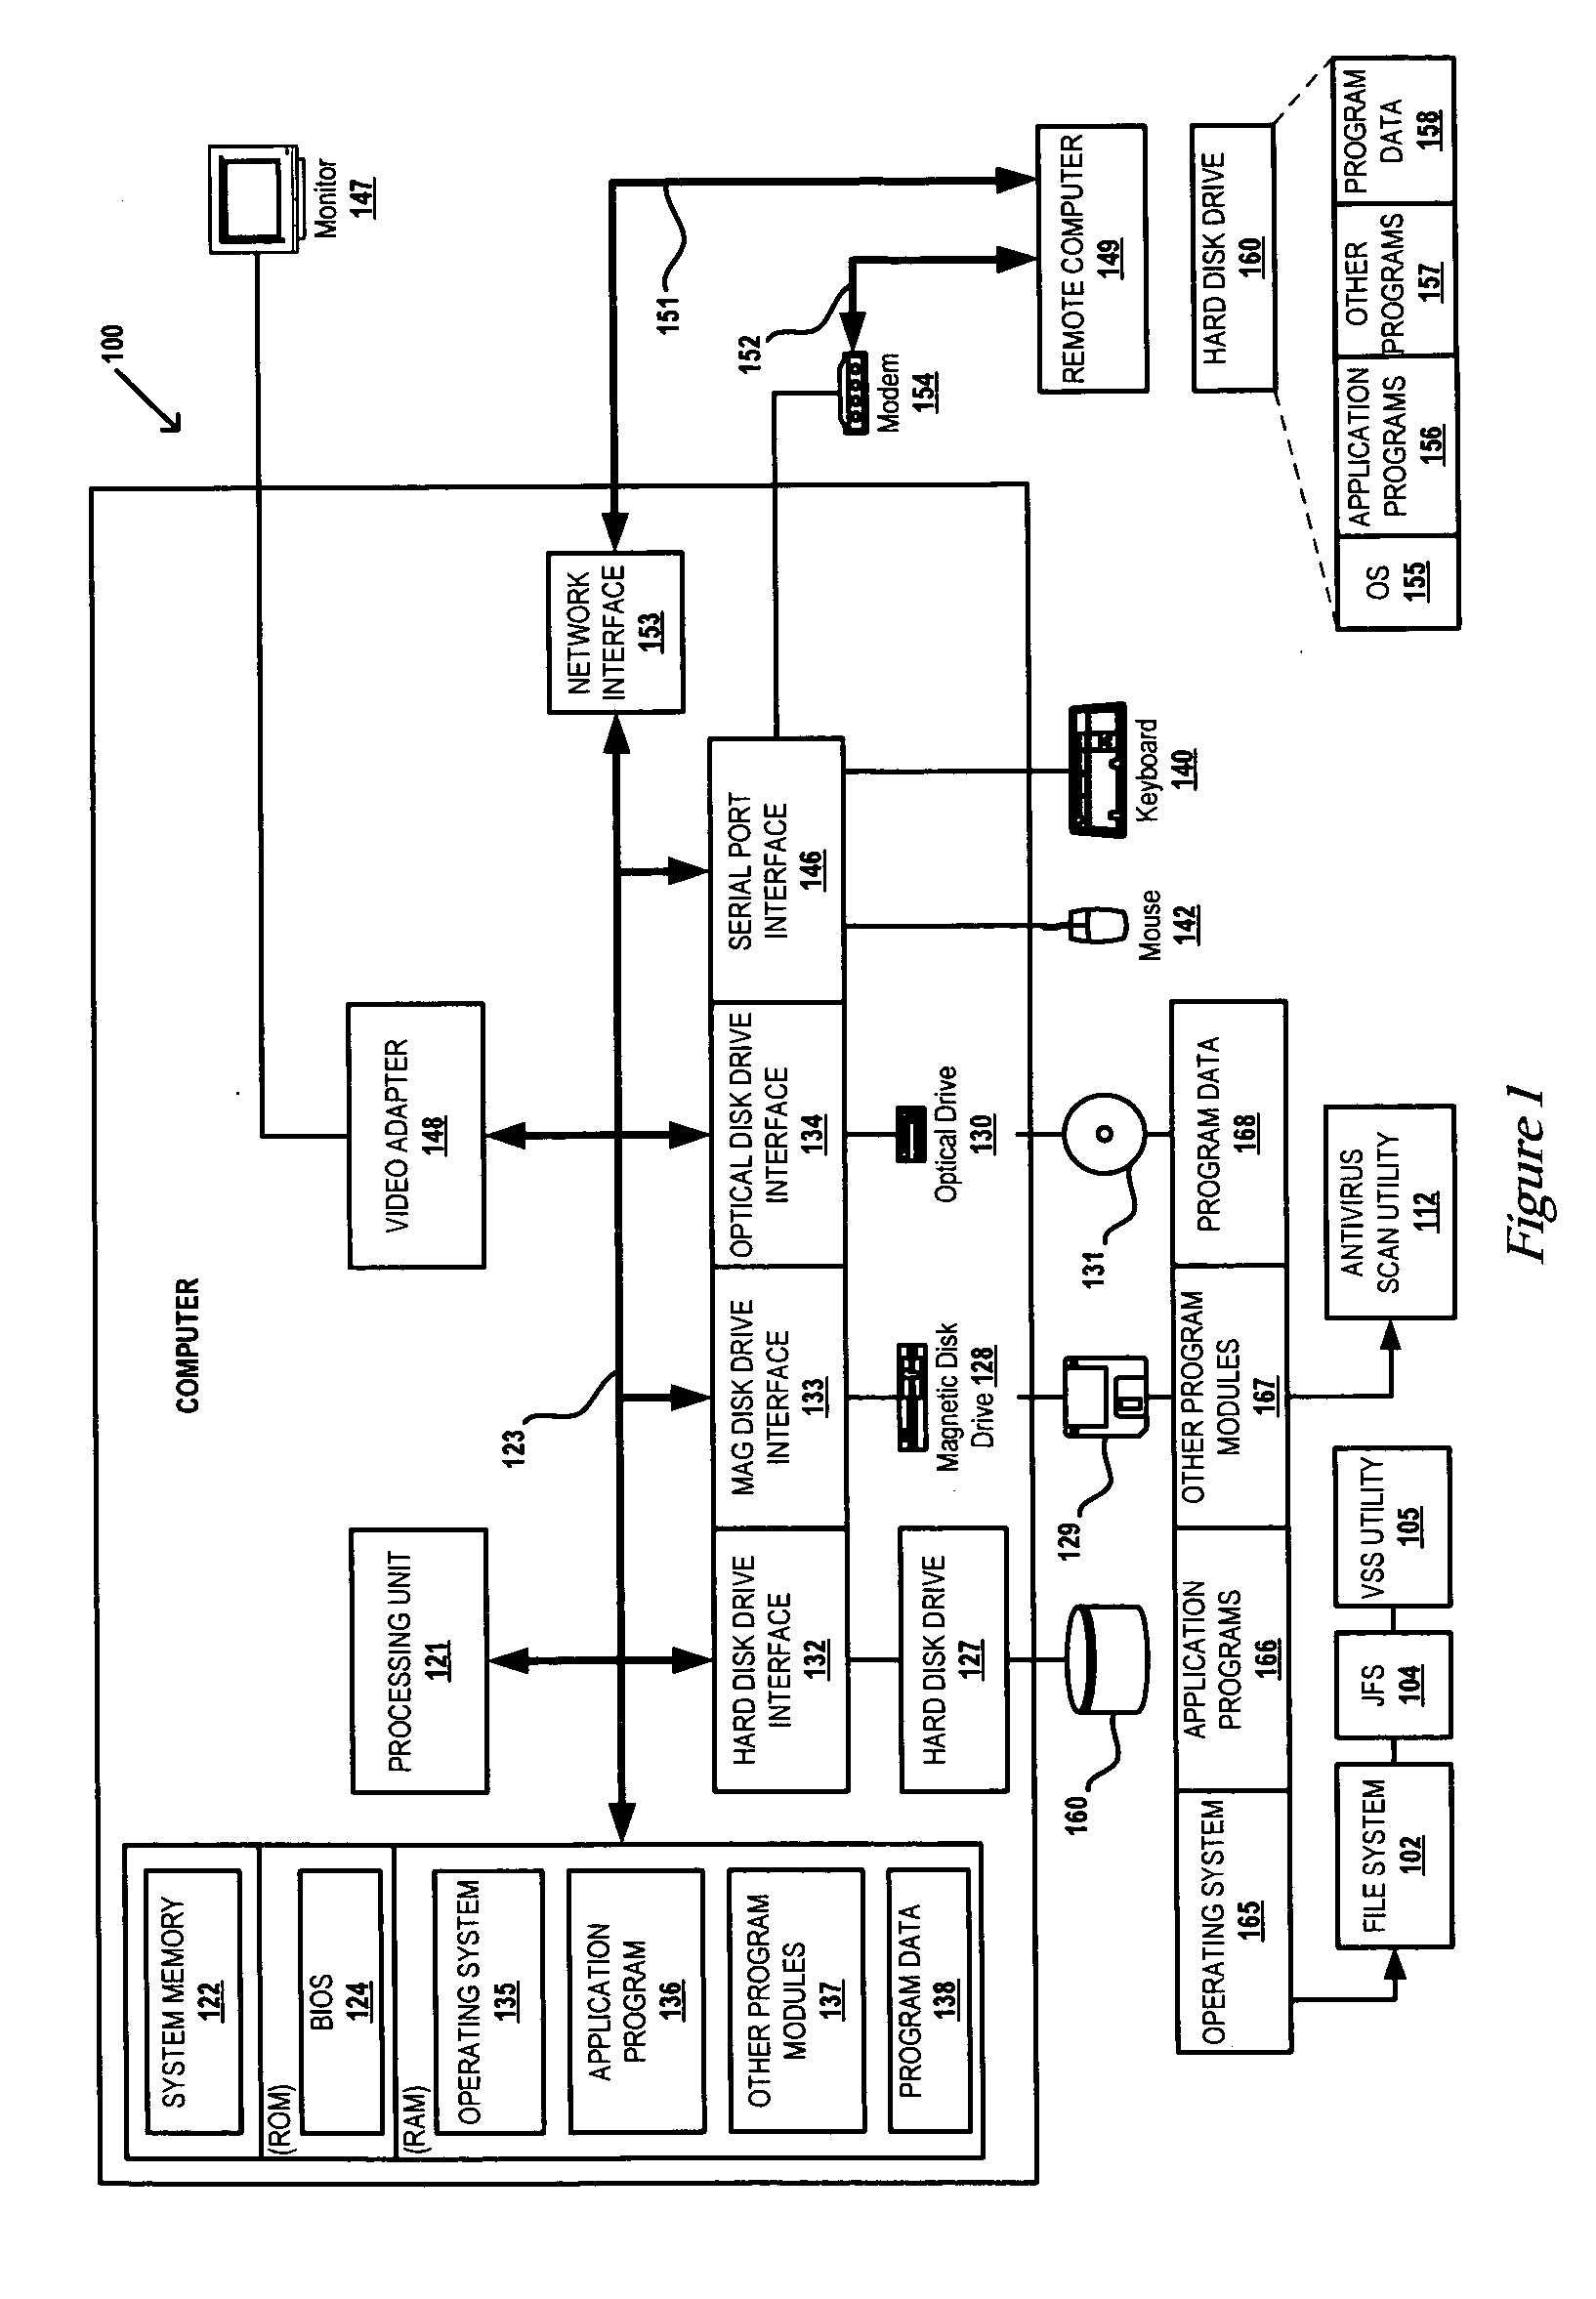 Method/system to speed up antivirus scans using a journal file system